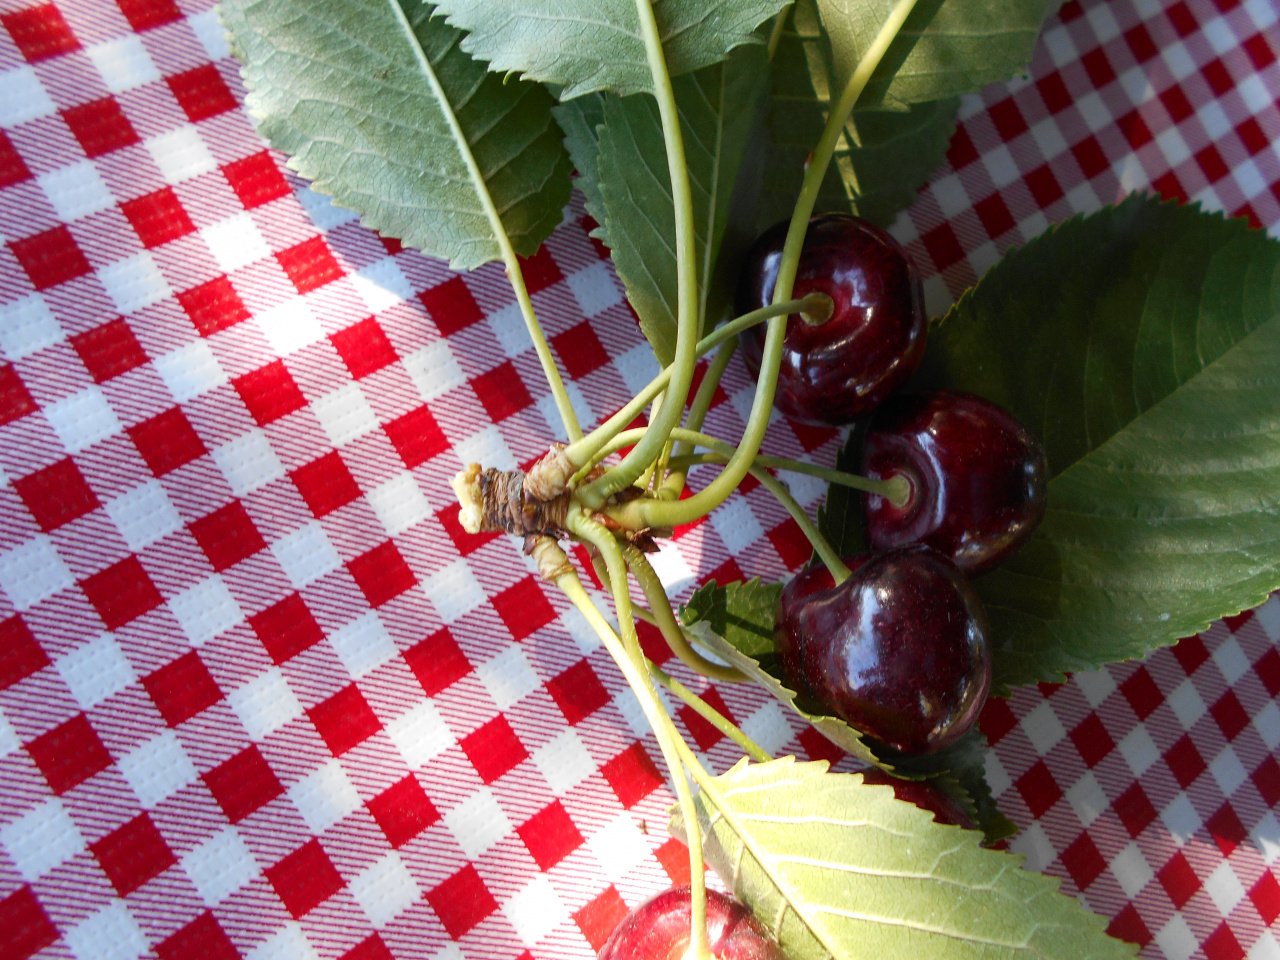 do not pick cherries with the spur and leaves, the wooden spur is where cherries will grow next year
